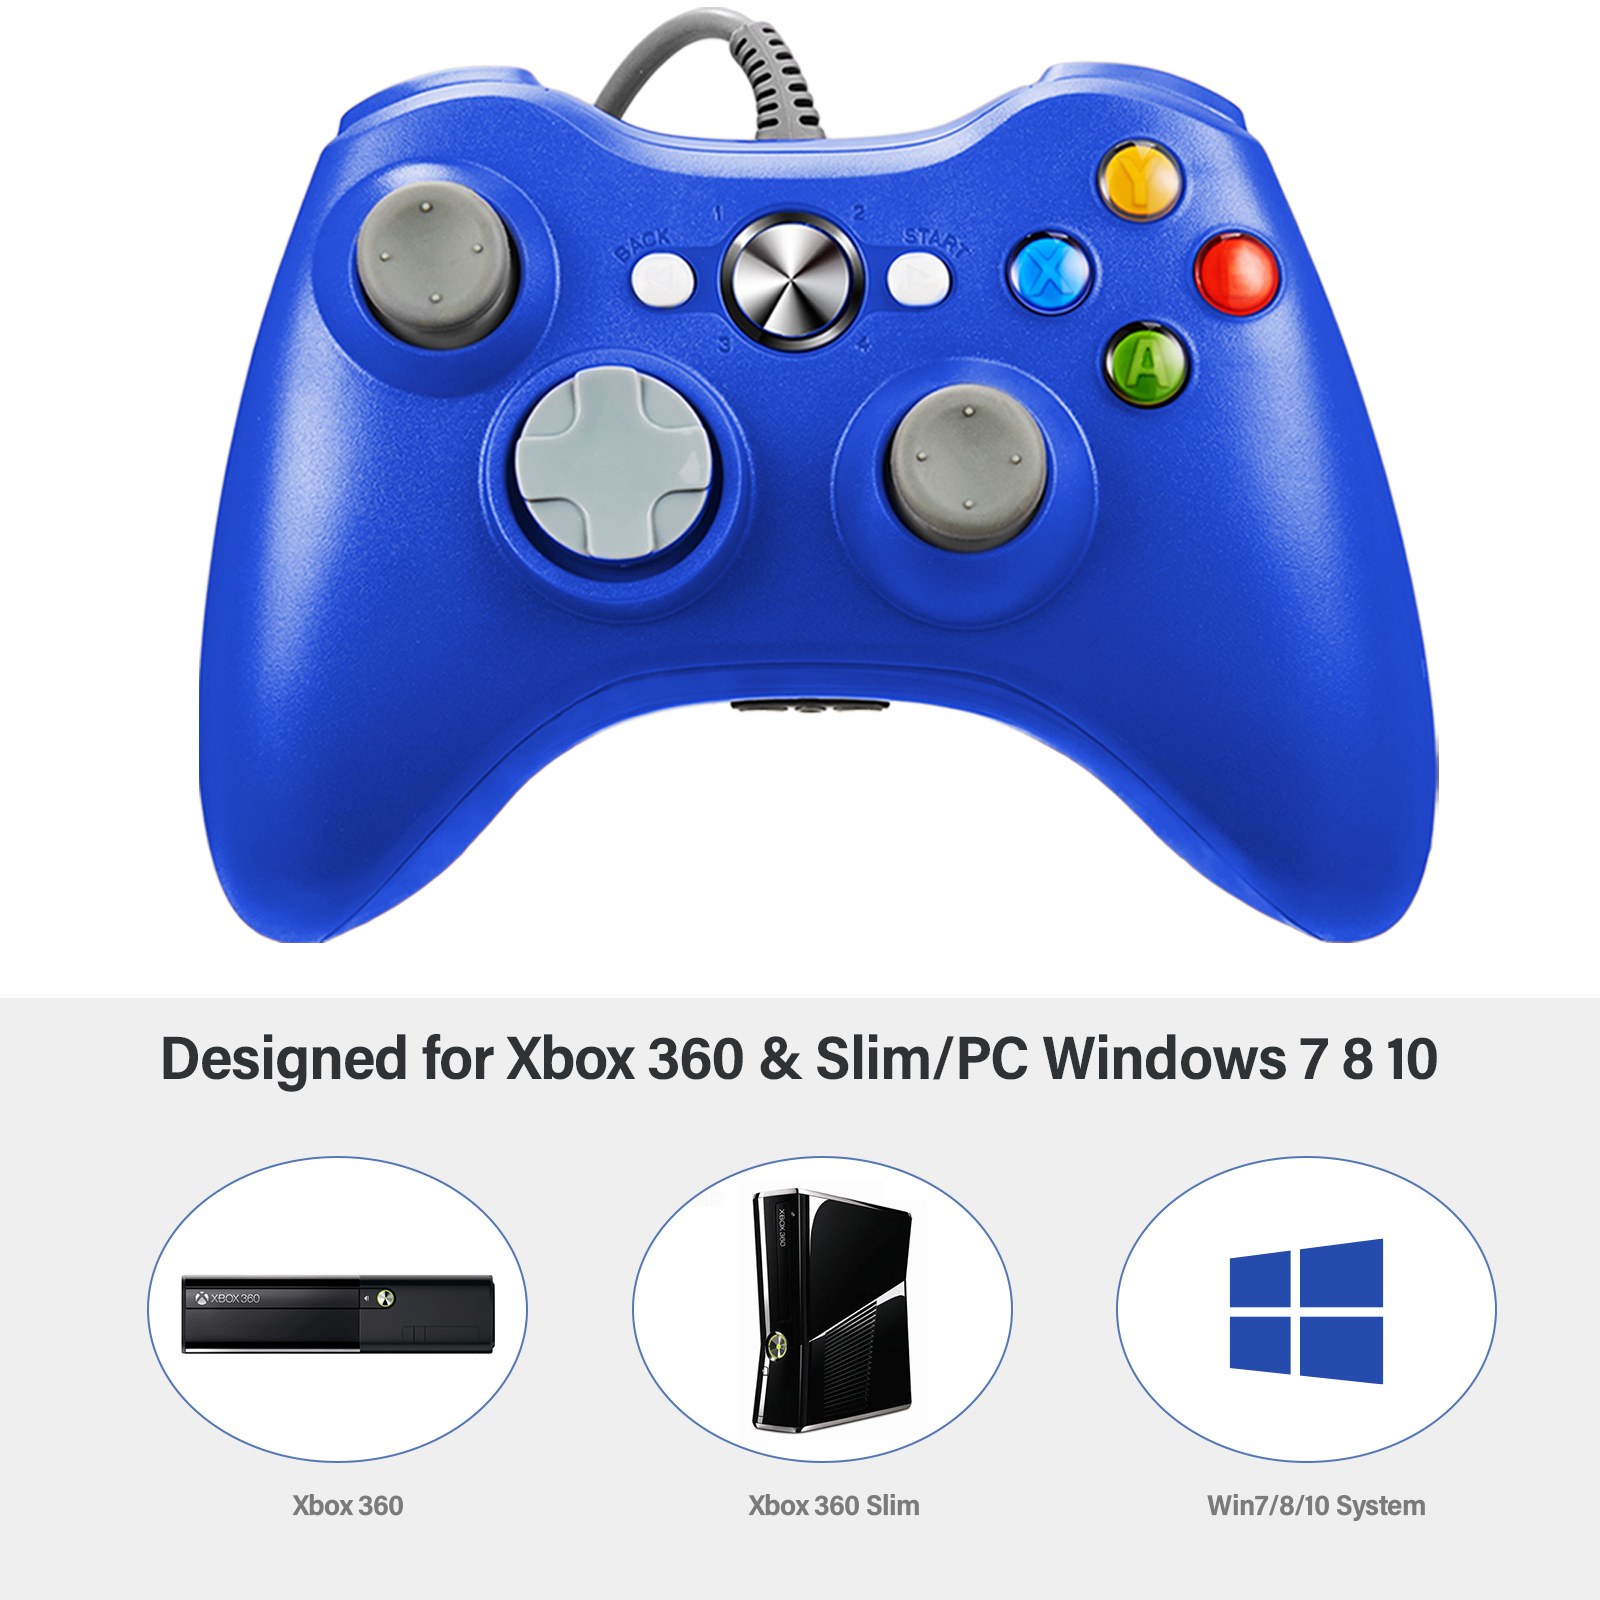 LUXMO Xbox 360 Wired Controlle with Shoulders Buttons for Xbox 360/Xbox 360 Slim/PC Windows 7 8 10 Game (Blue) - image 2 of 7